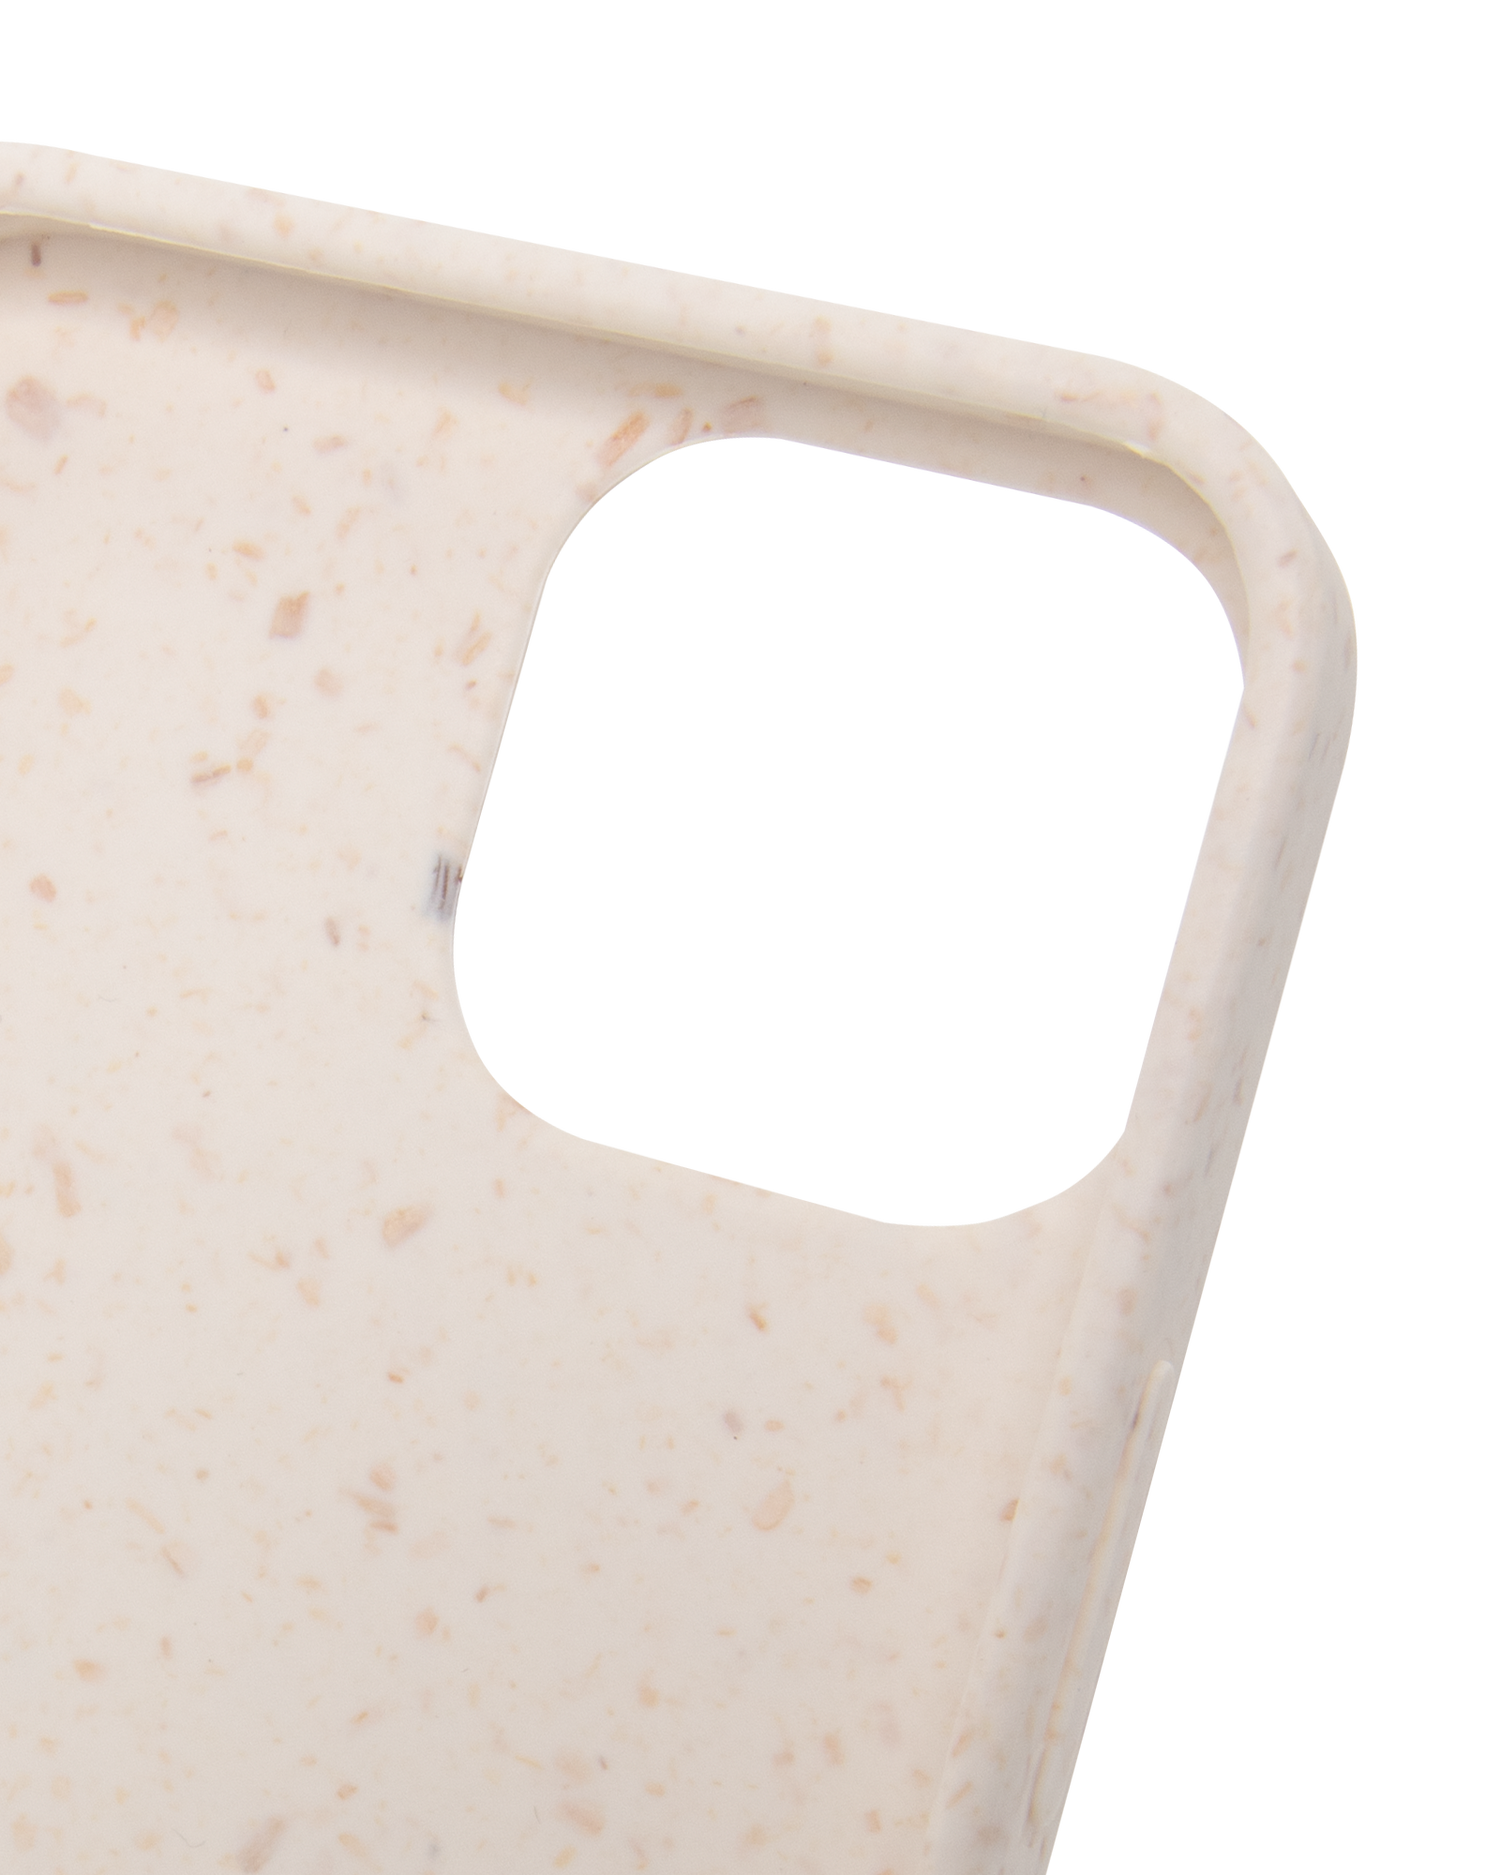 White Eco-Friendly Phone Case for Apple iPhone 12 mini: Details inside